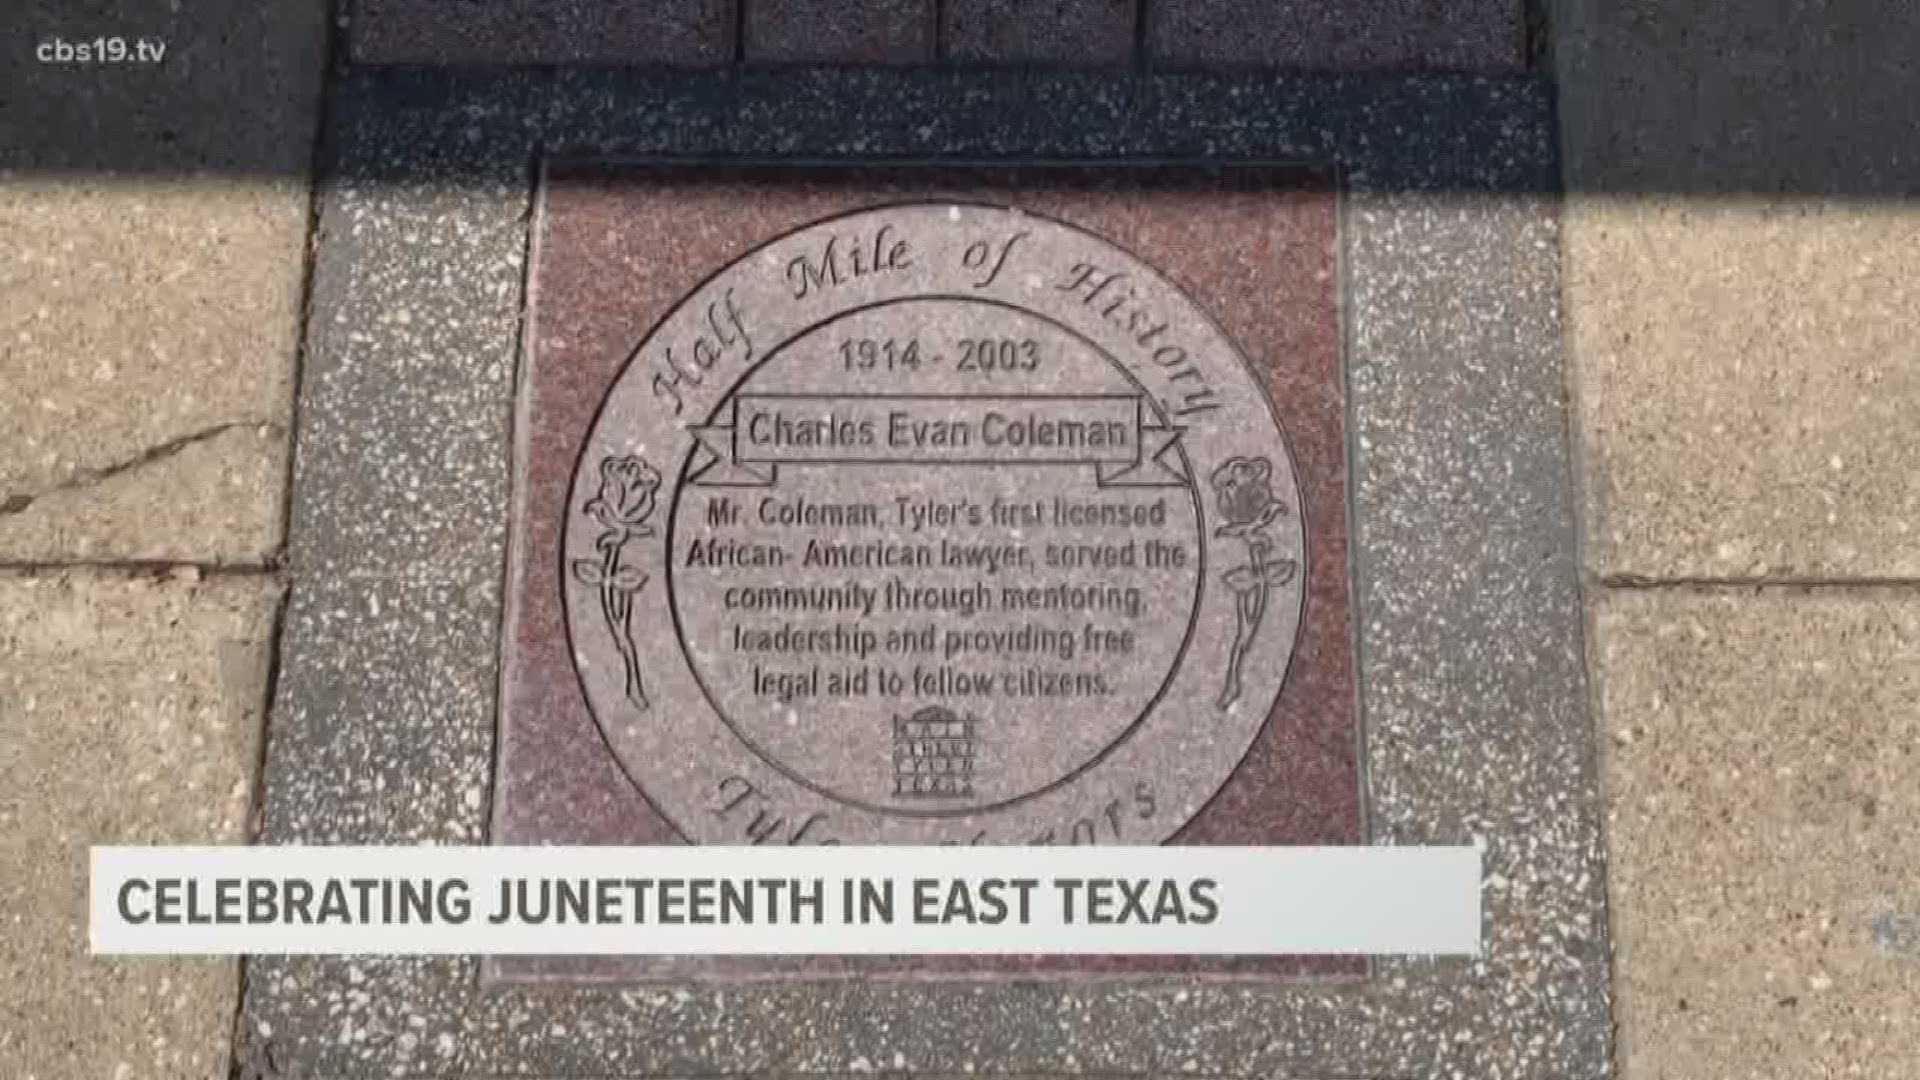 Juneteenth commemorates the day 155 years ago, slaves in Texas found out they had been freed by the Emancipation Proclamation.